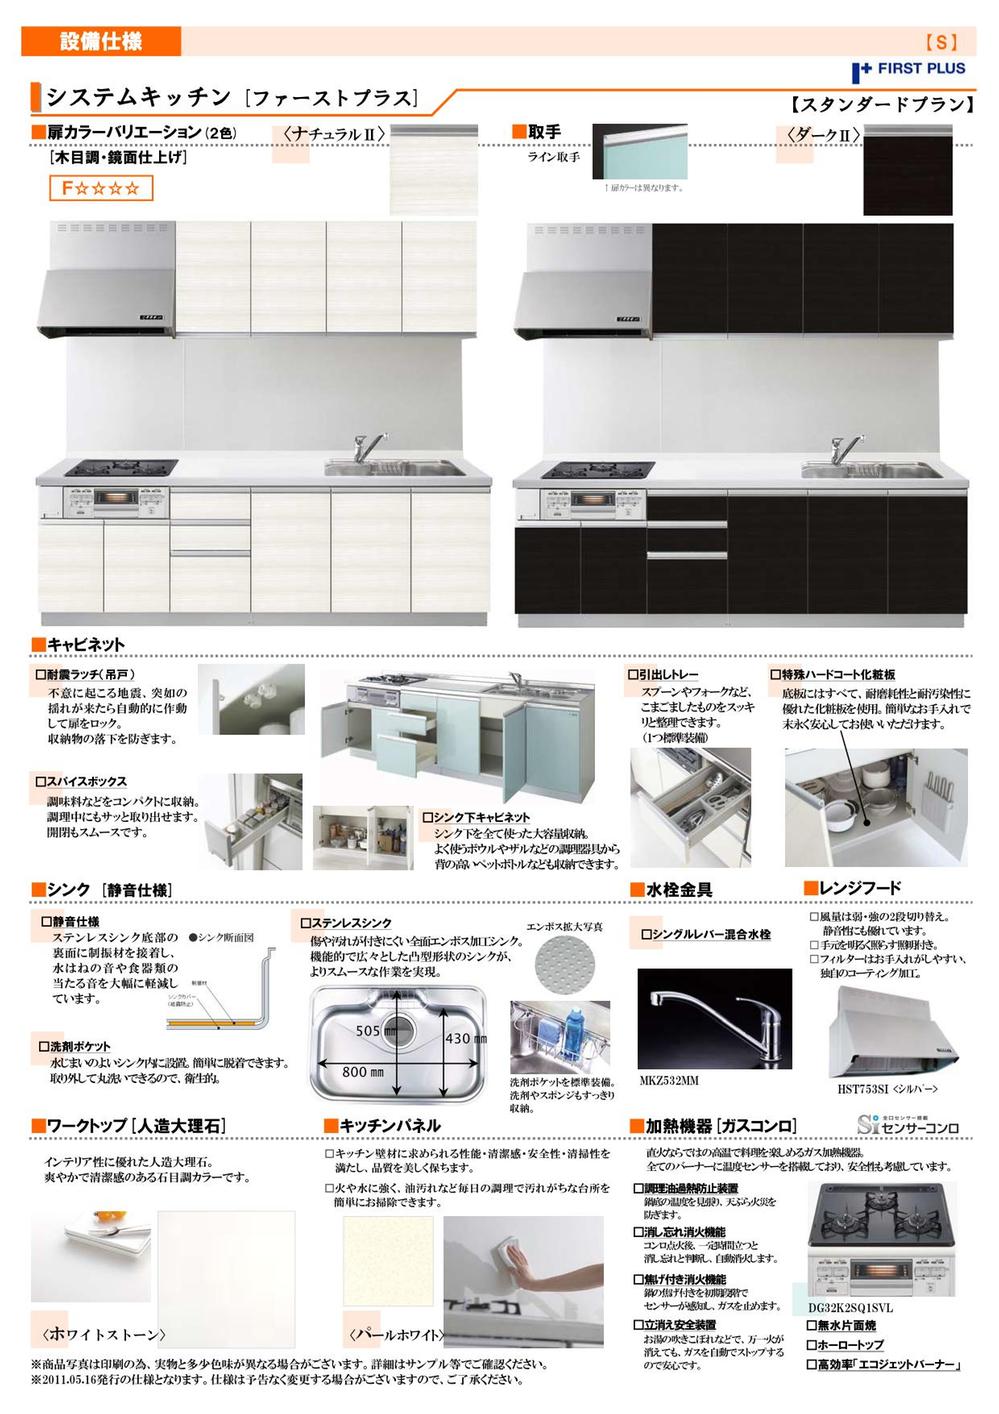 Construction ・ Construction method ・ specification. Specification brochure image